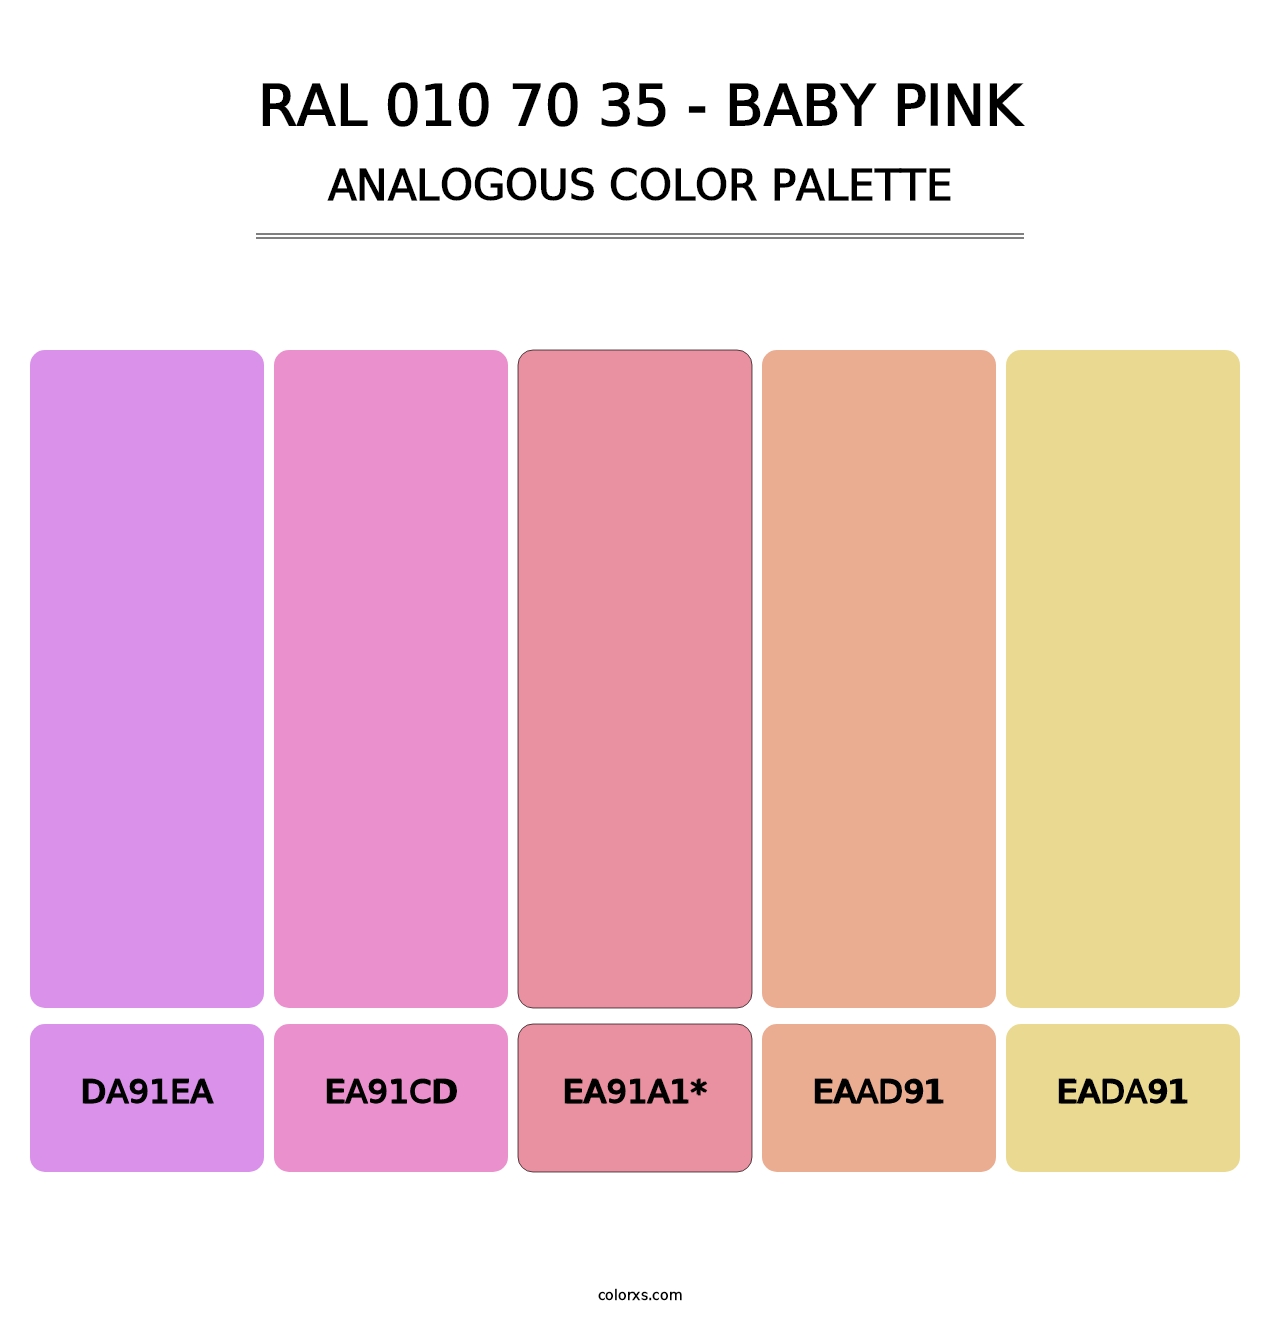 RAL 010 70 35 - Baby Pink - Analogous Color Palette